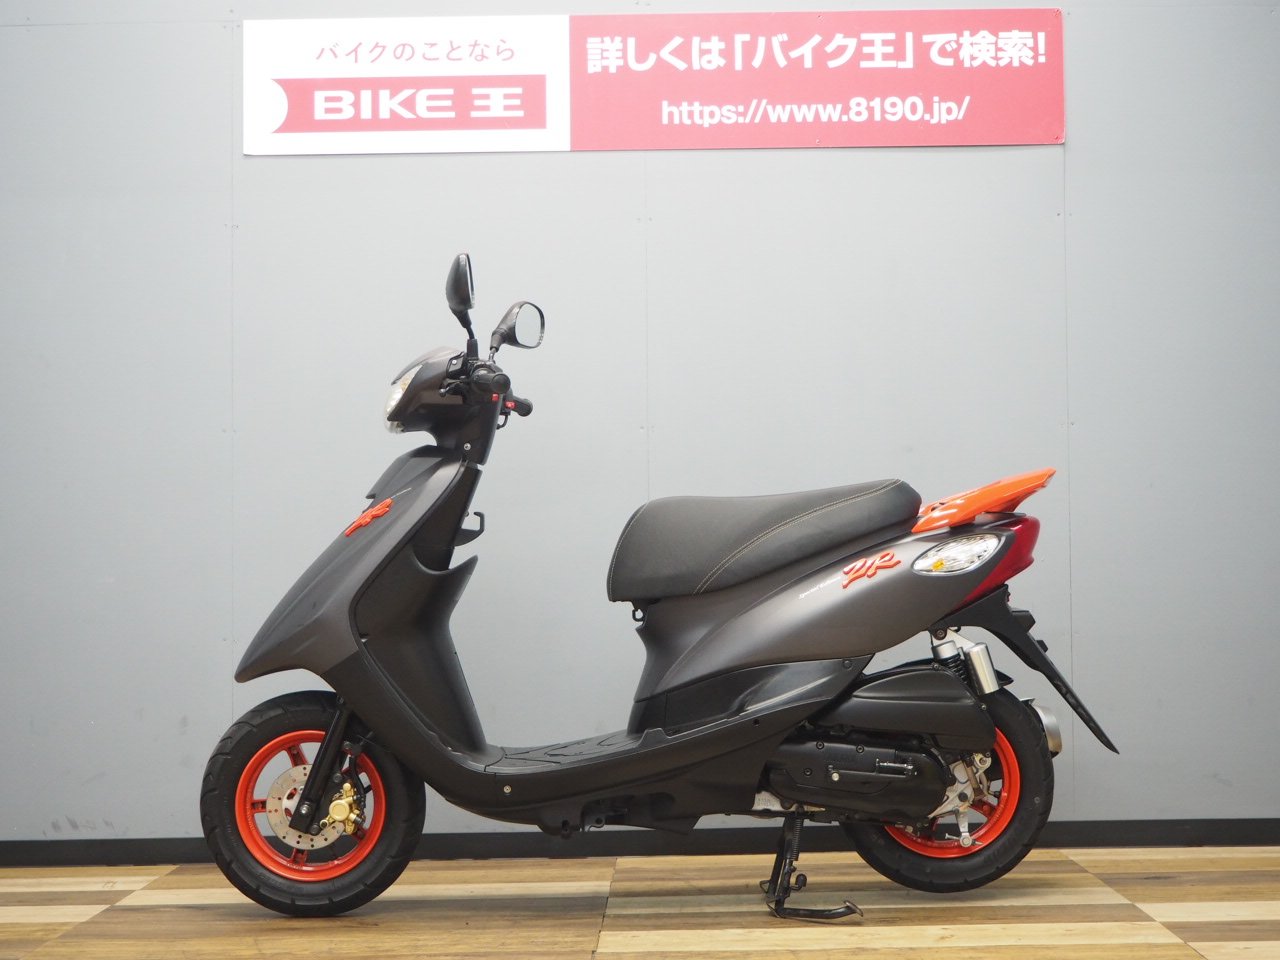 JOG ZR 3P3S SpecialEdition | バイク買うなら【バイク王】